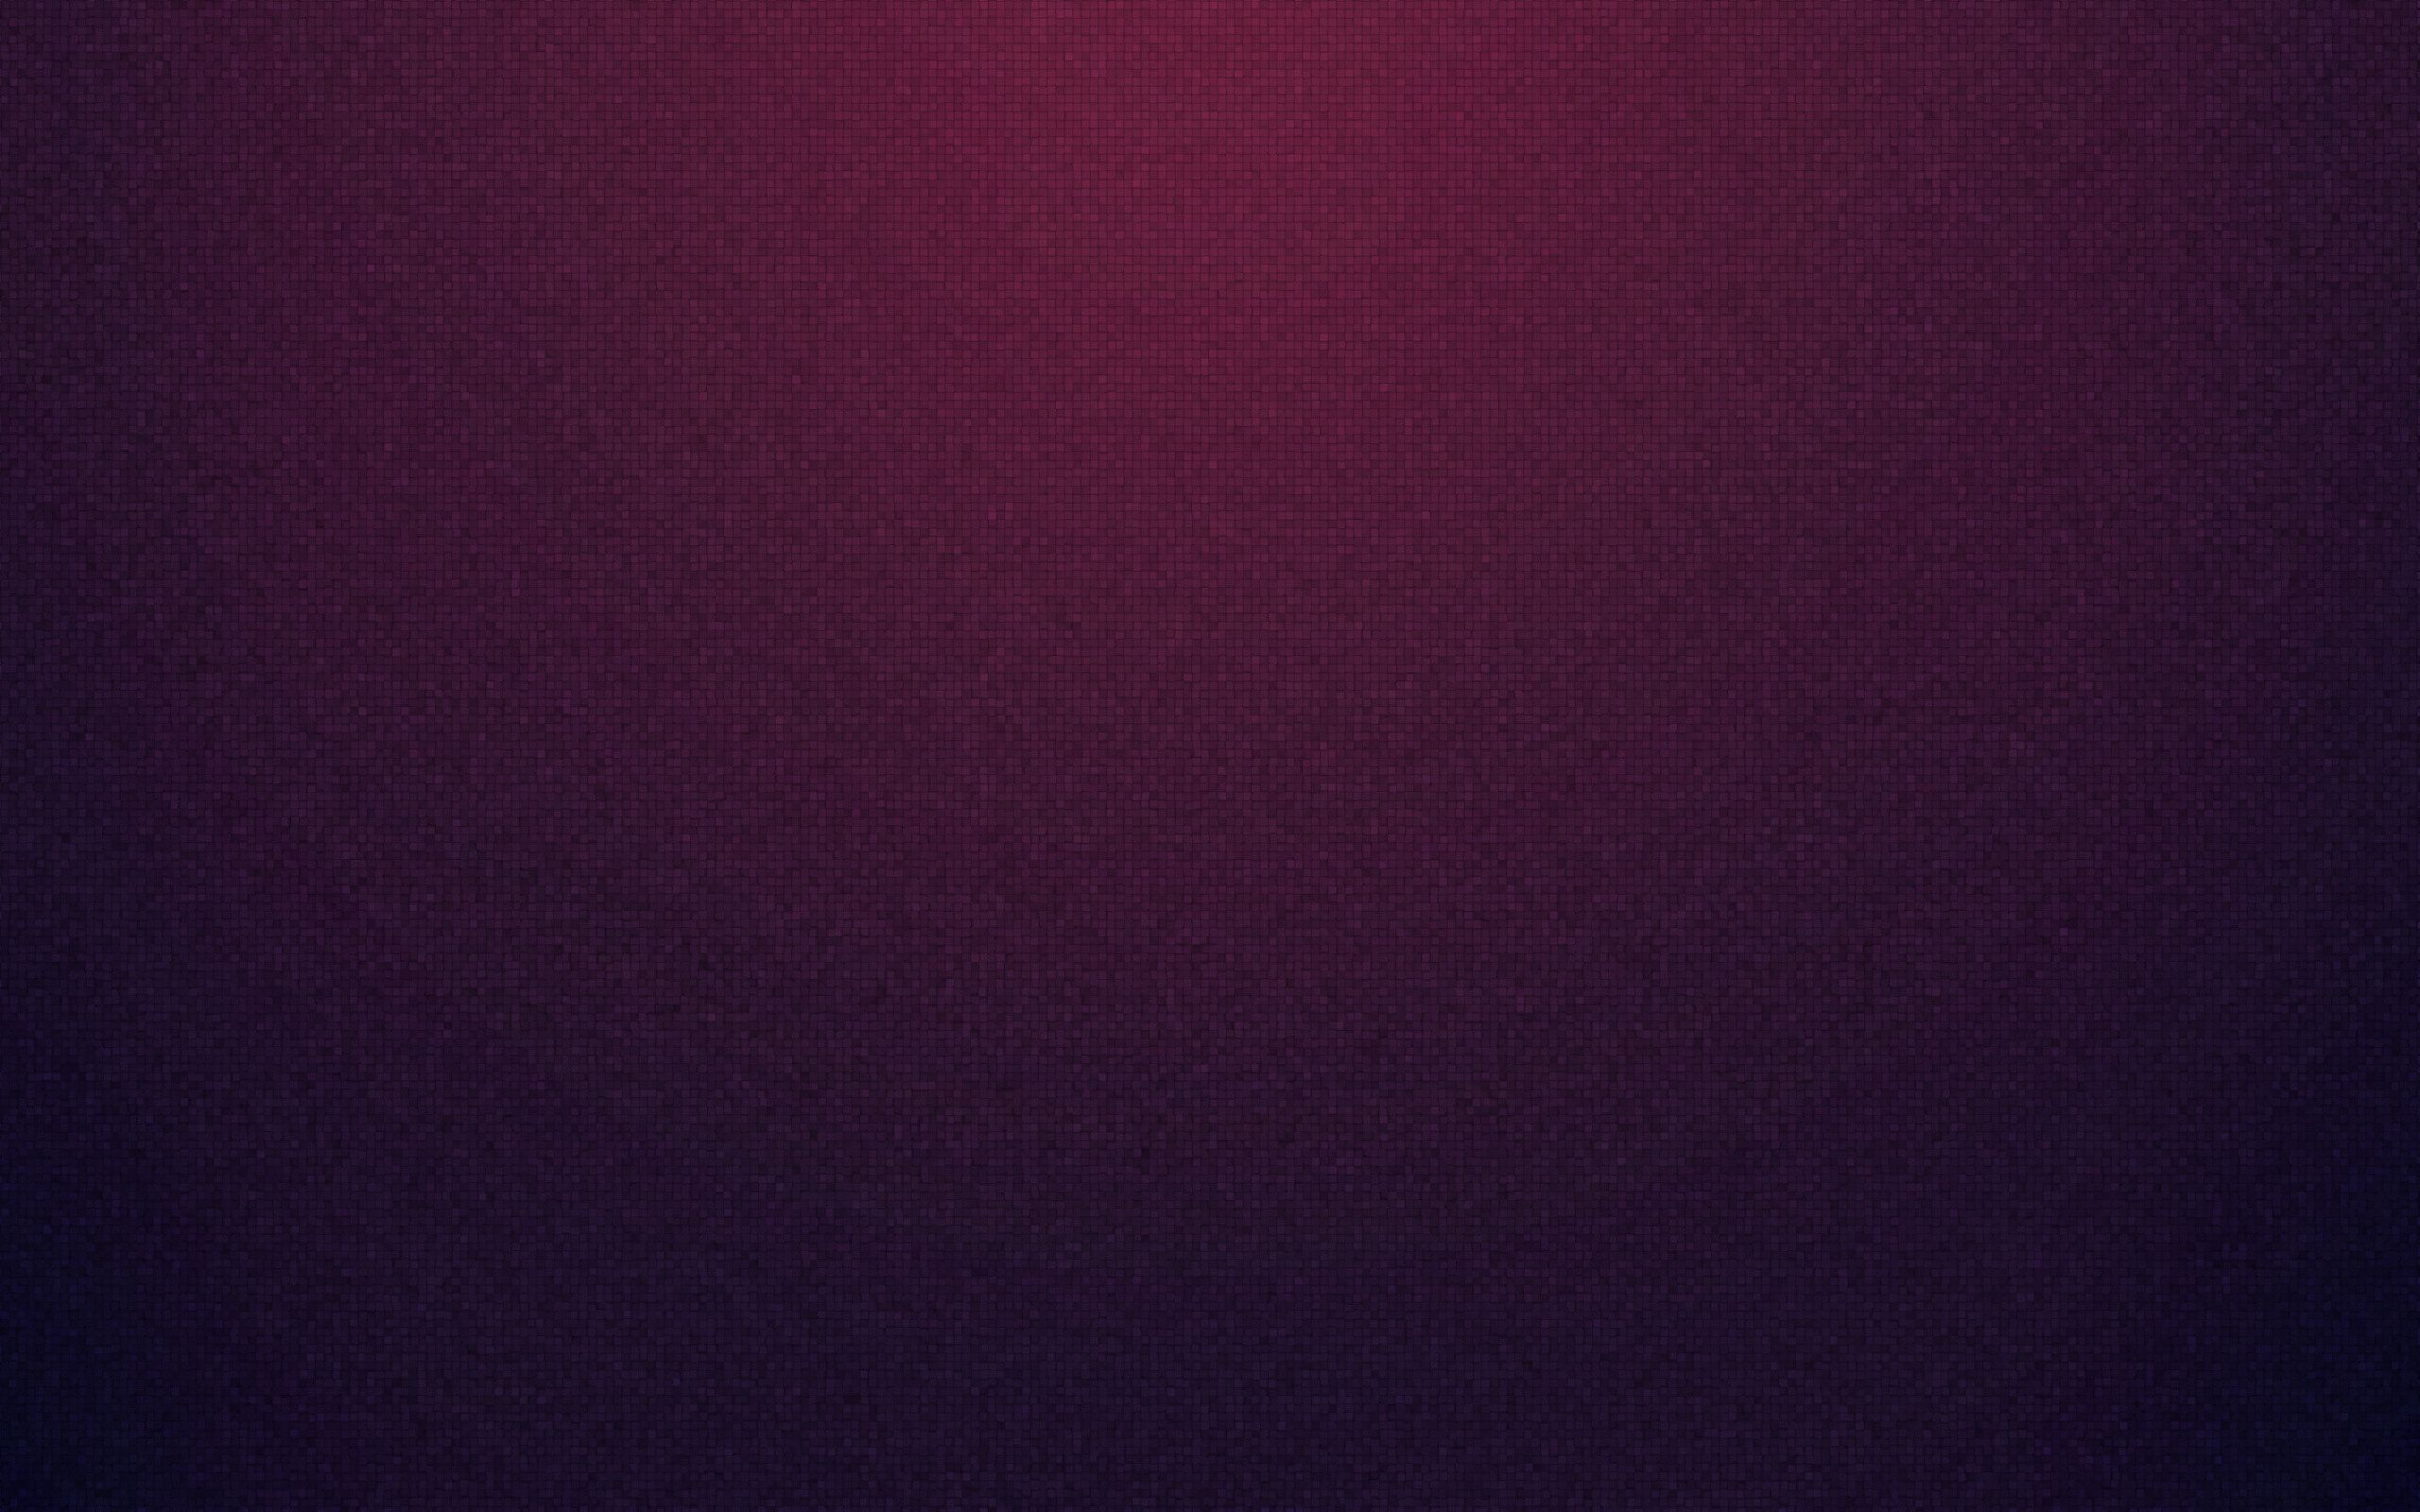 88559 free wallpaper 600x1280 for phone, download images  600x1280 for mobile